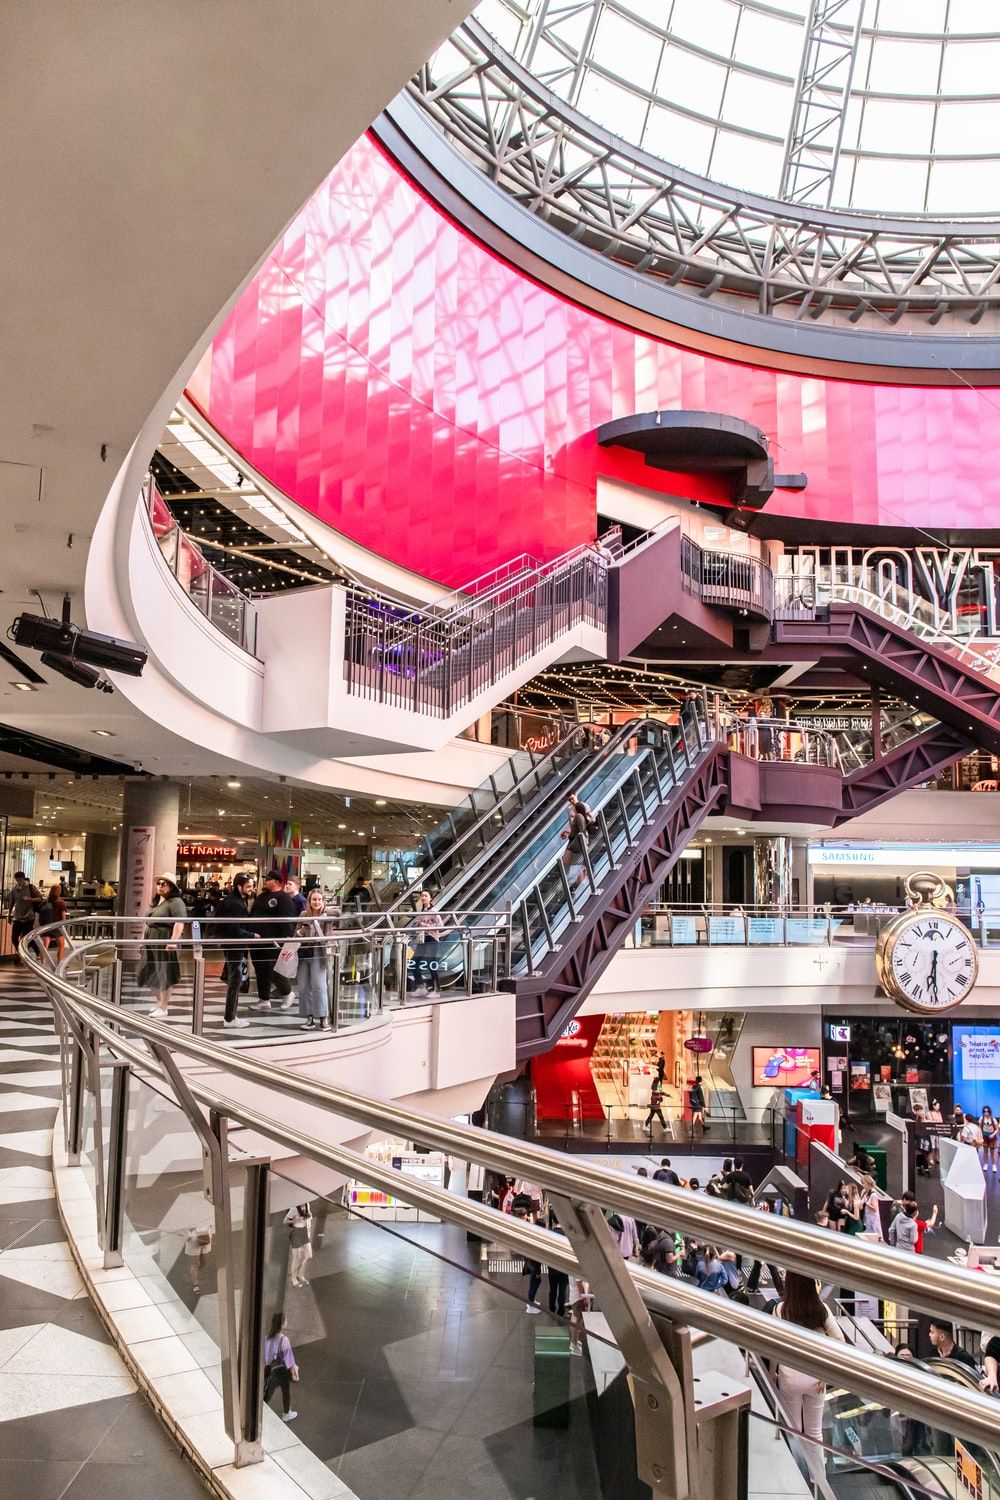 Shopping Centre Picture. Download Free Image